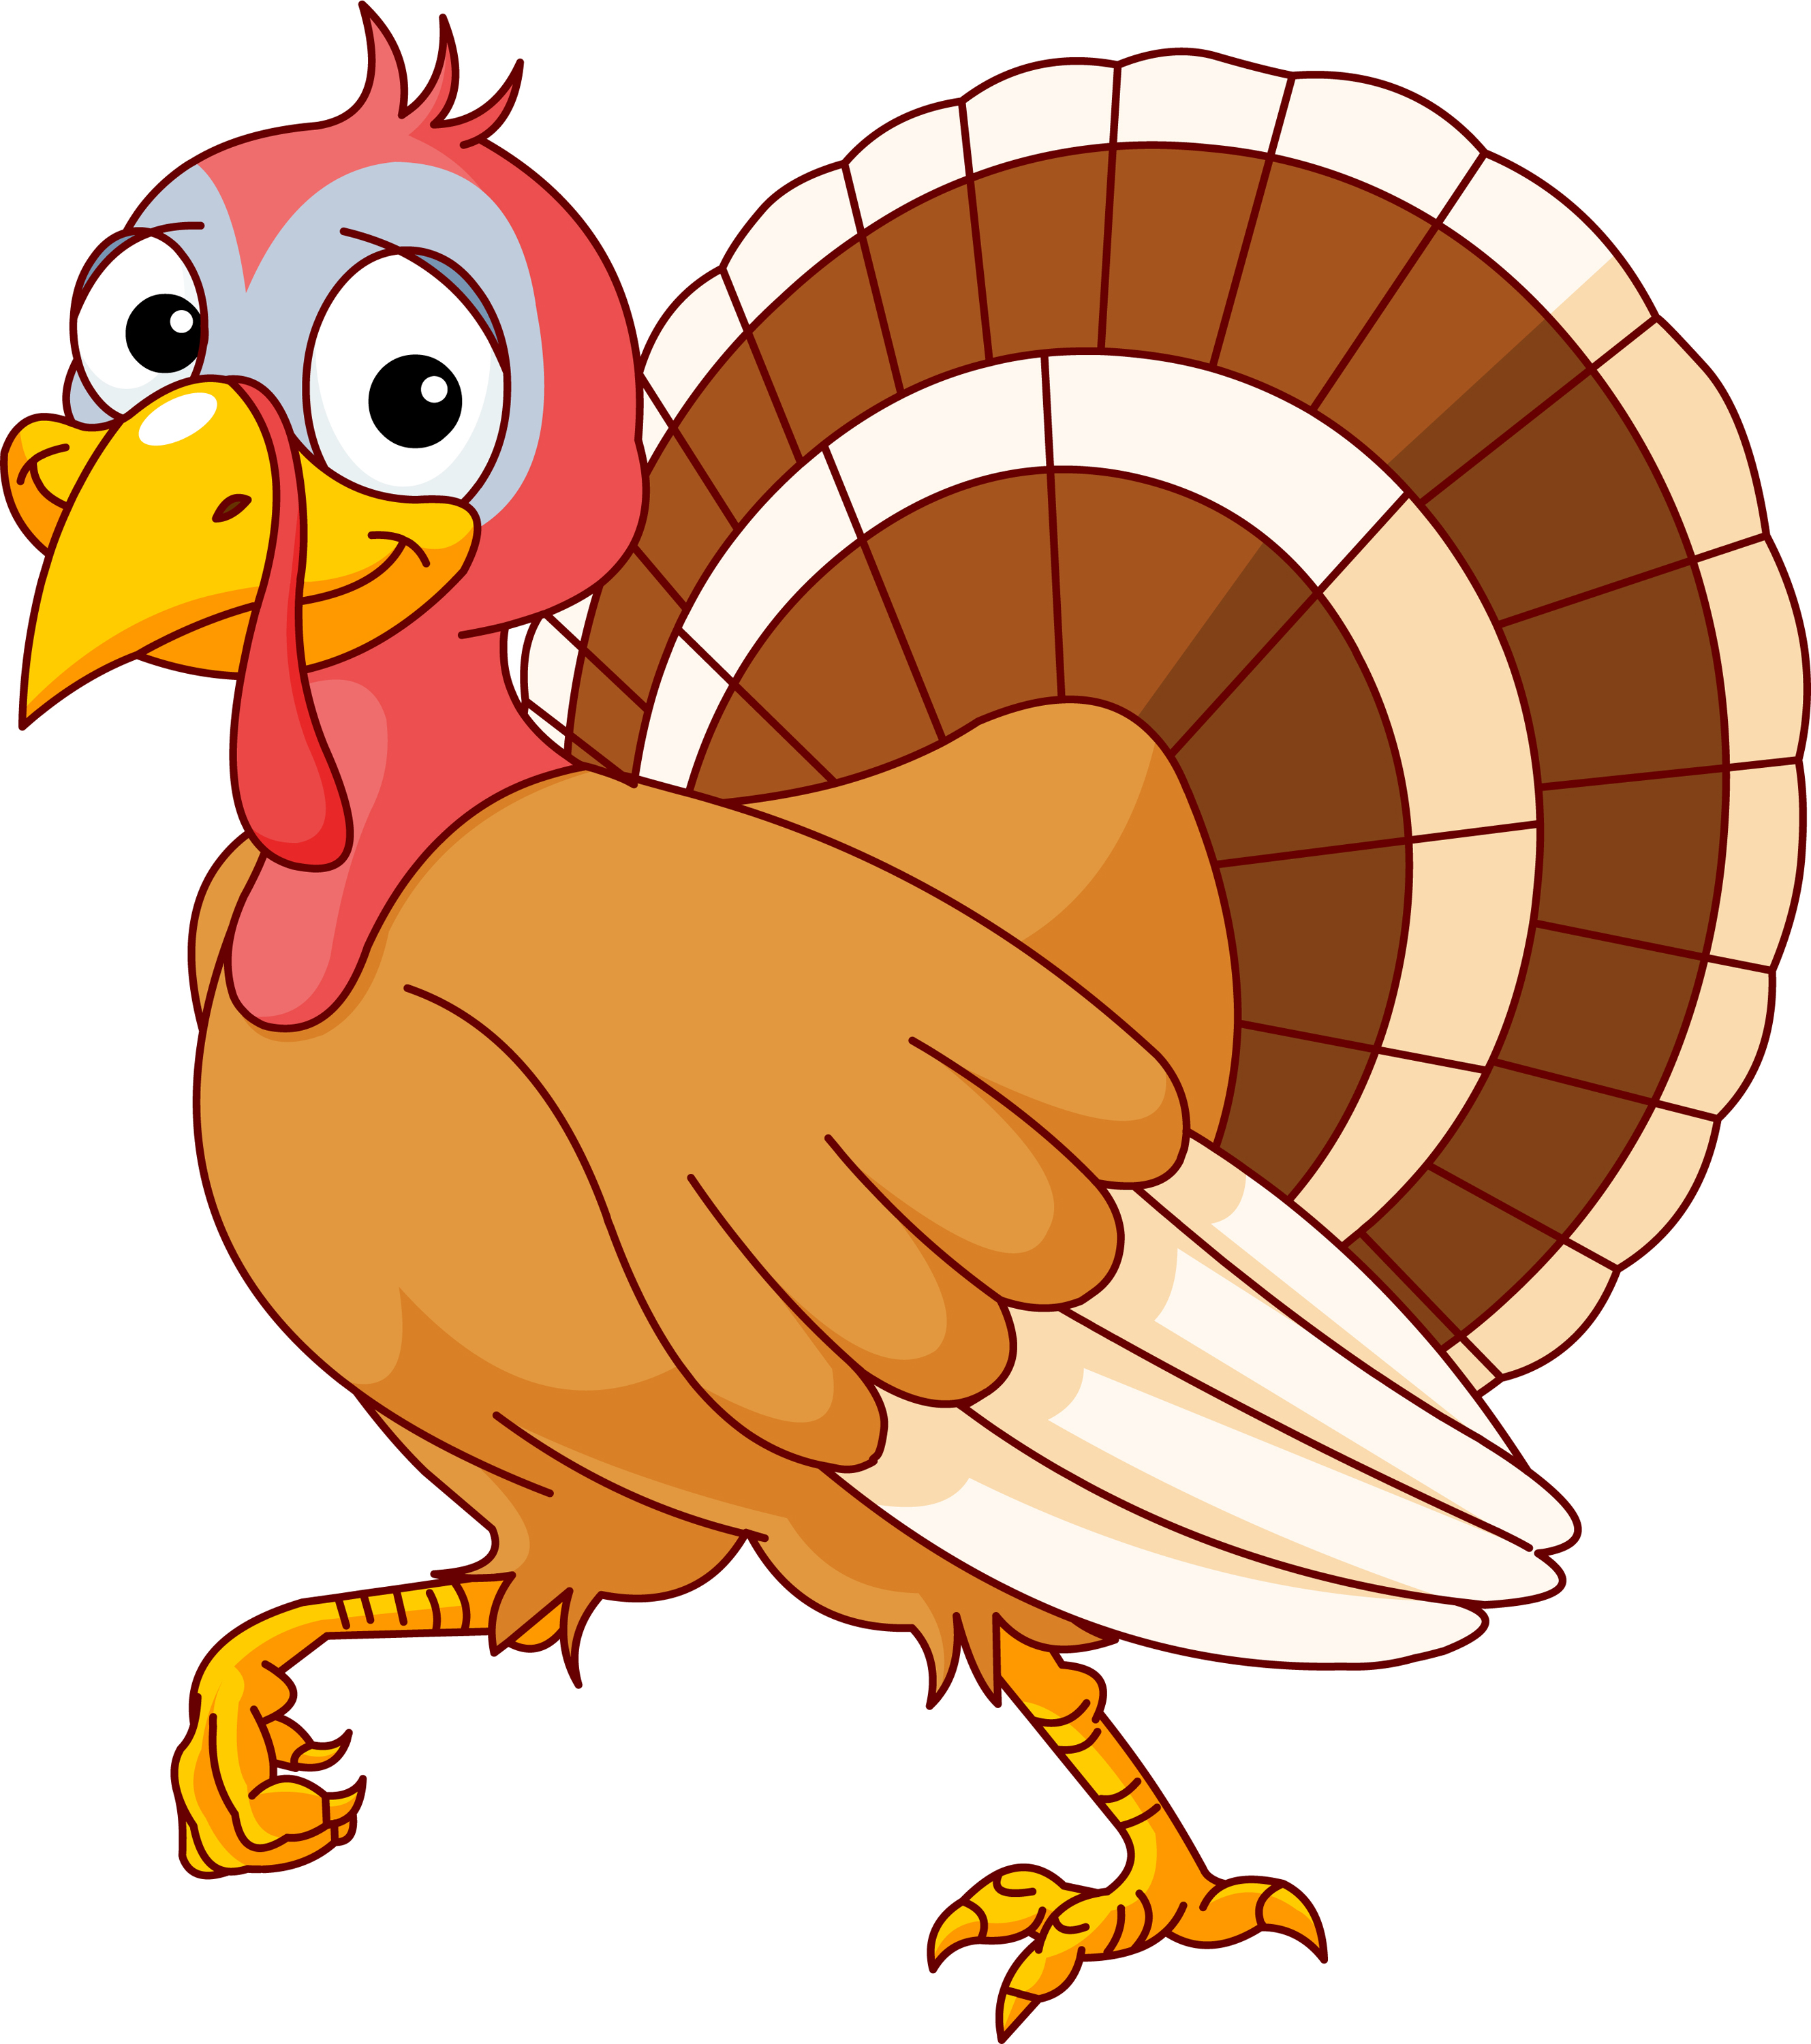 Nerd Culture Podcast » Blog Archive » Interview with a Turkey